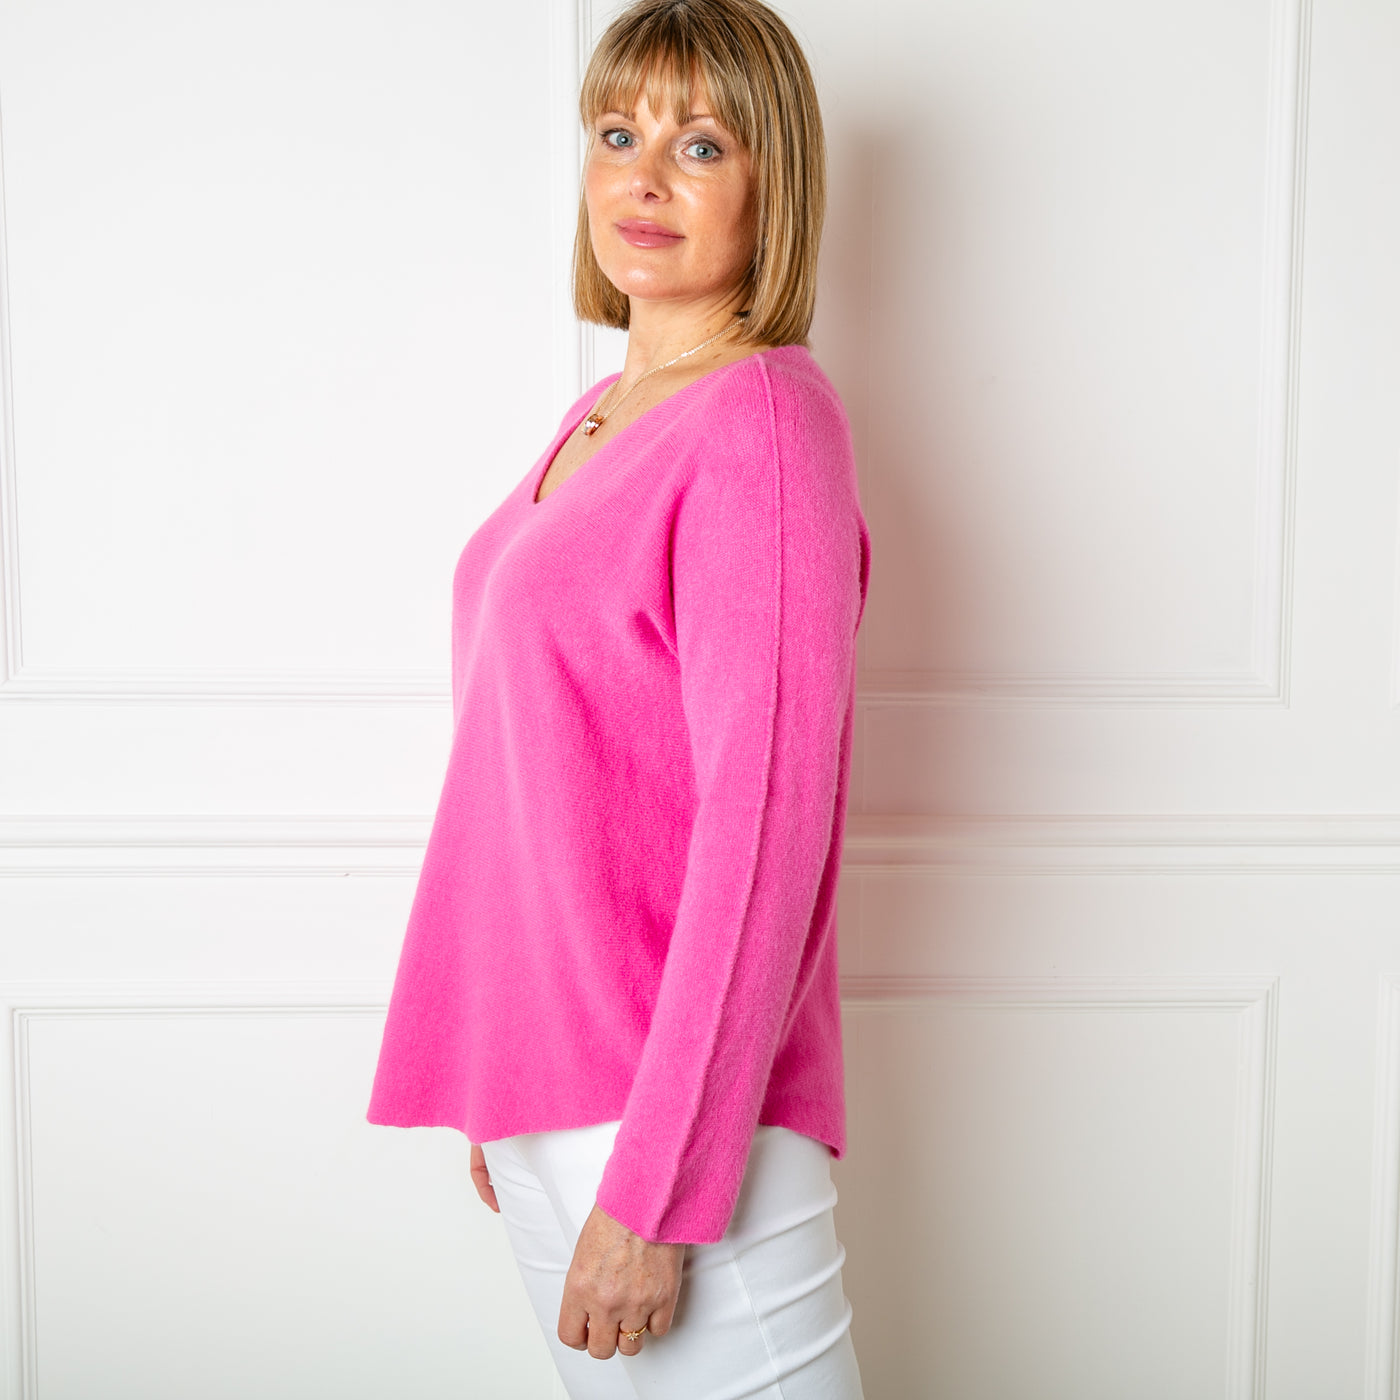 The fuchsia pink Soft V Neck Jumper made from a super soft fine knitted blend material